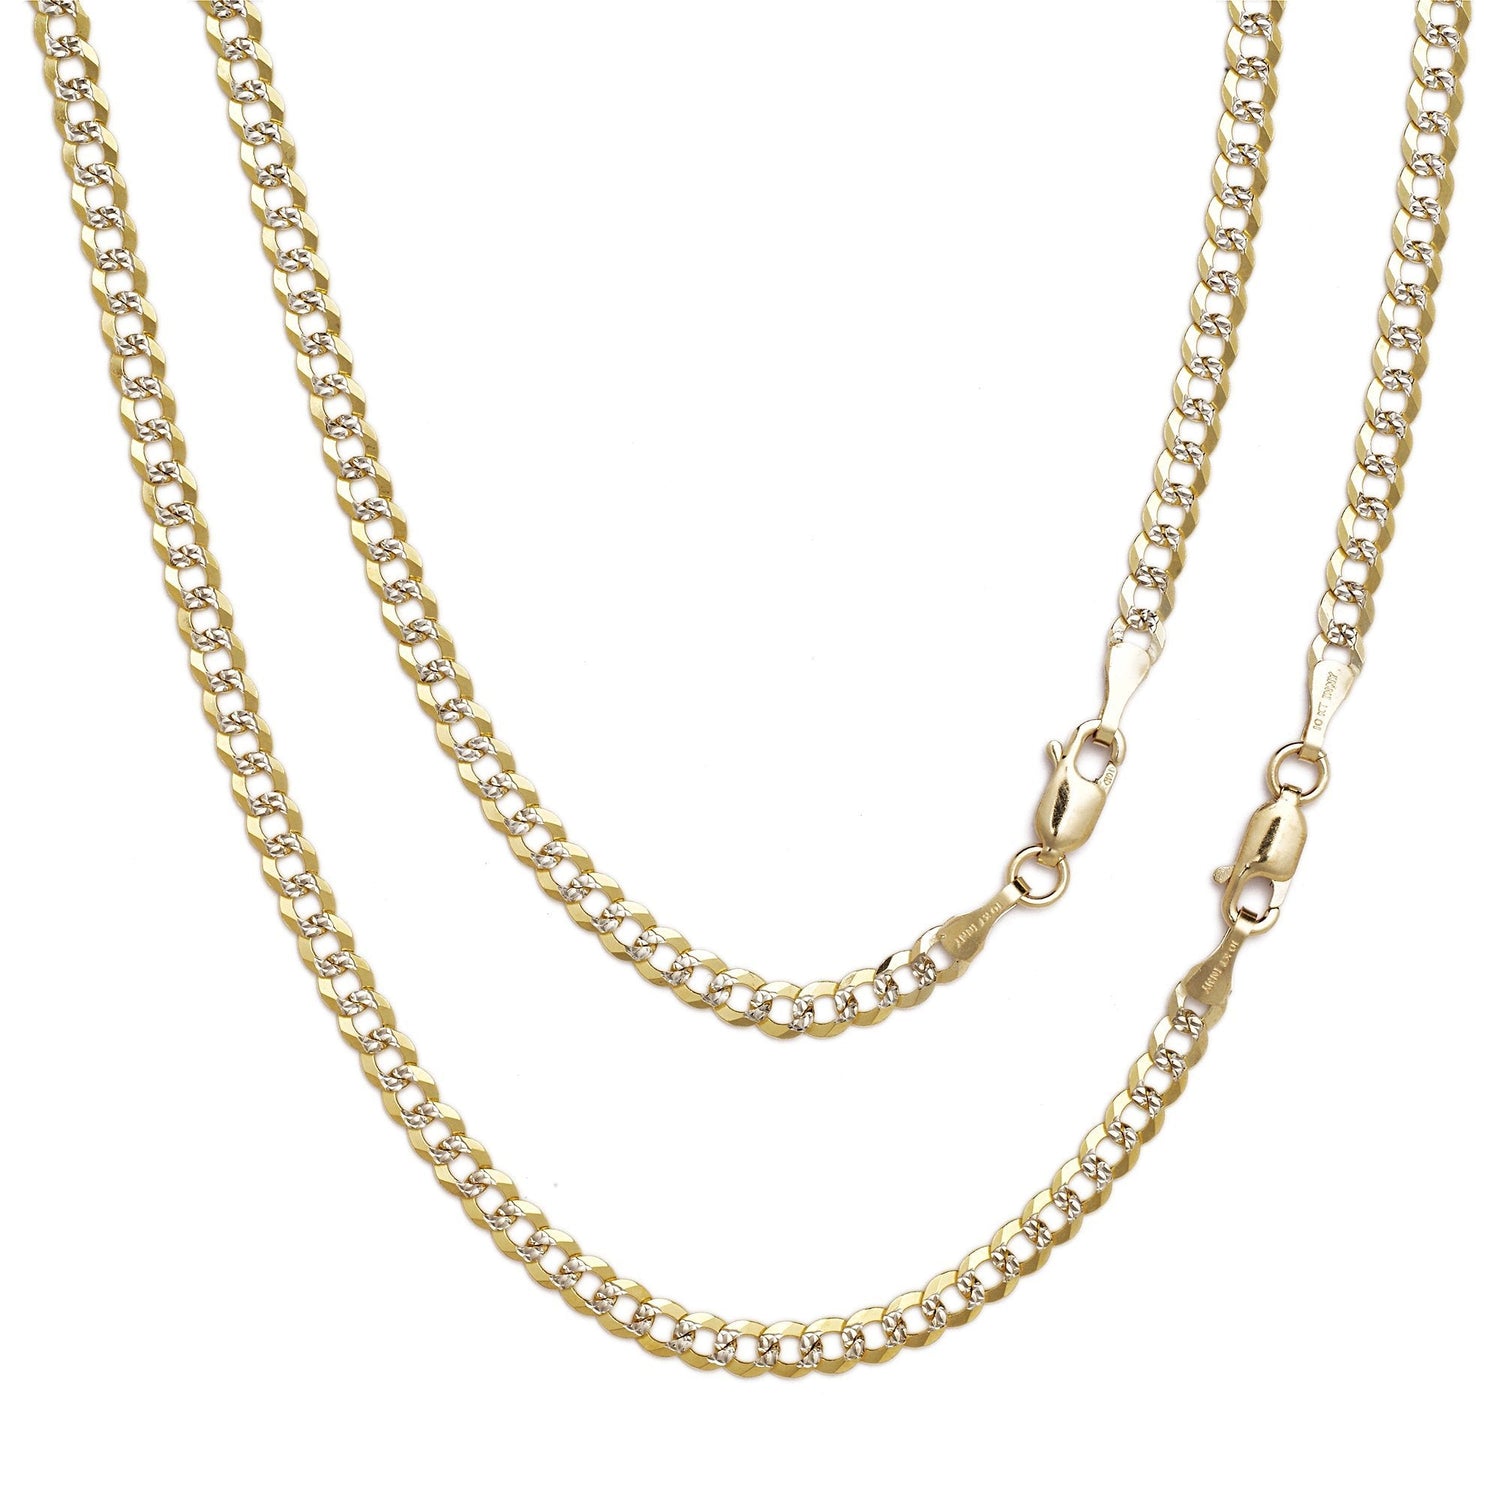 10k Curb Cuban Chain Necklace, 0.16 Inch (4mm), All Sizes, Sterling Silver or Fine Gold